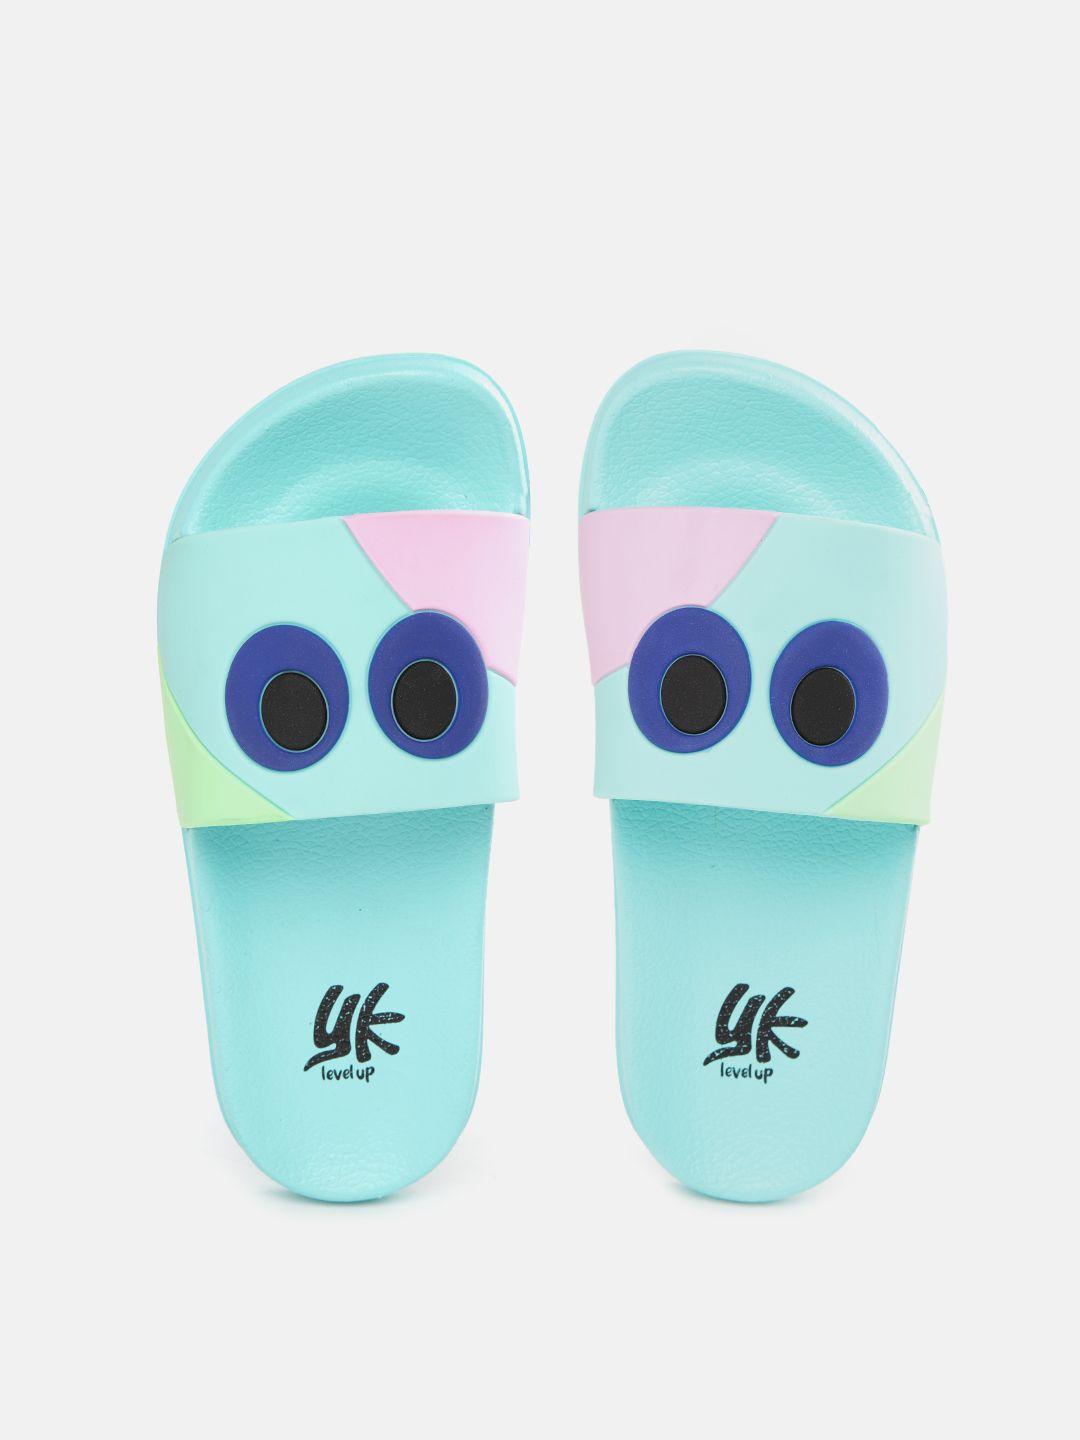 yk-boys-blue-&-pink-quirky-printed-sliders